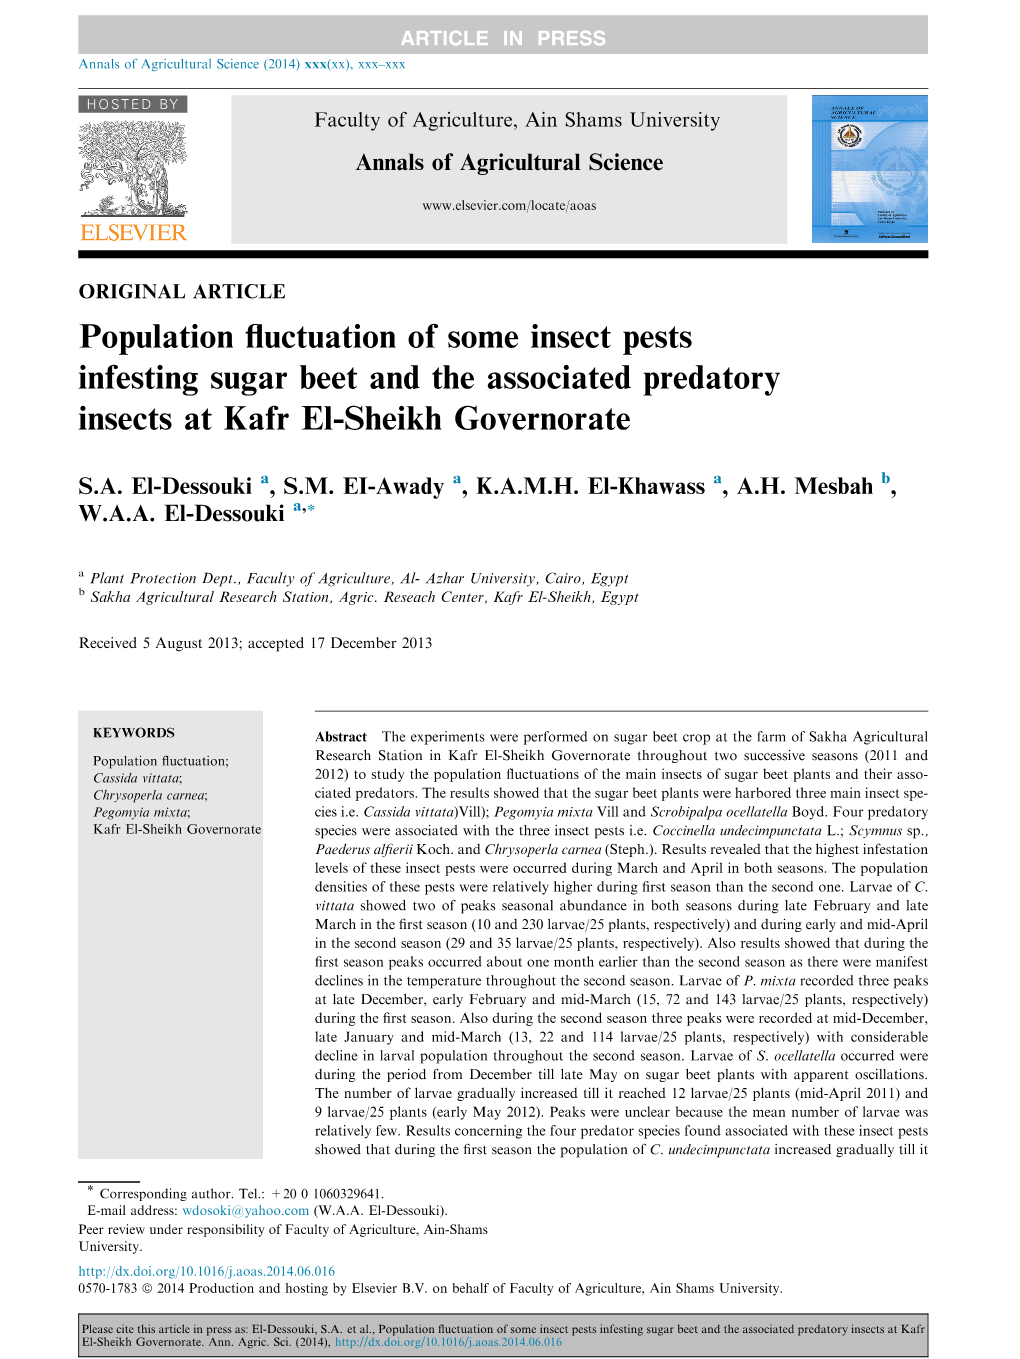 Population Fluctuation of Some Insect Pests Infesting Sugar Beet and The